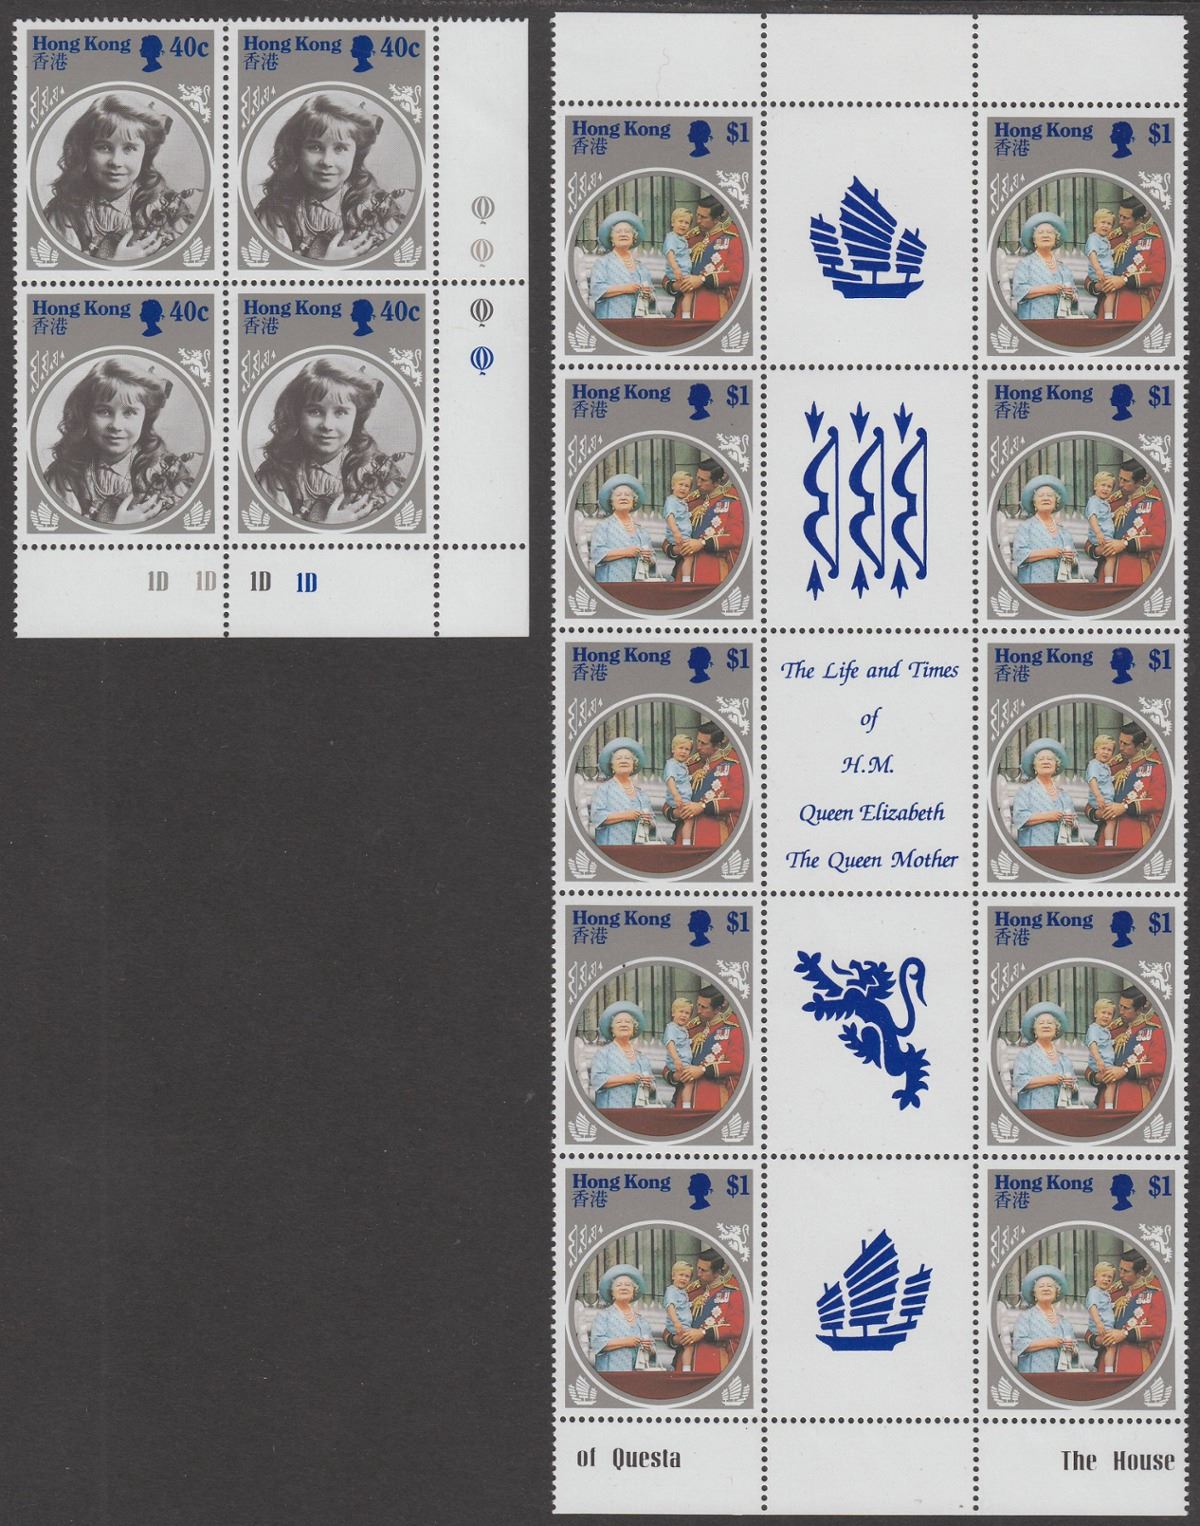 Hong Kong 1985 QEII Life and Times Queen Mother Set in Multiples Mint SG493-496